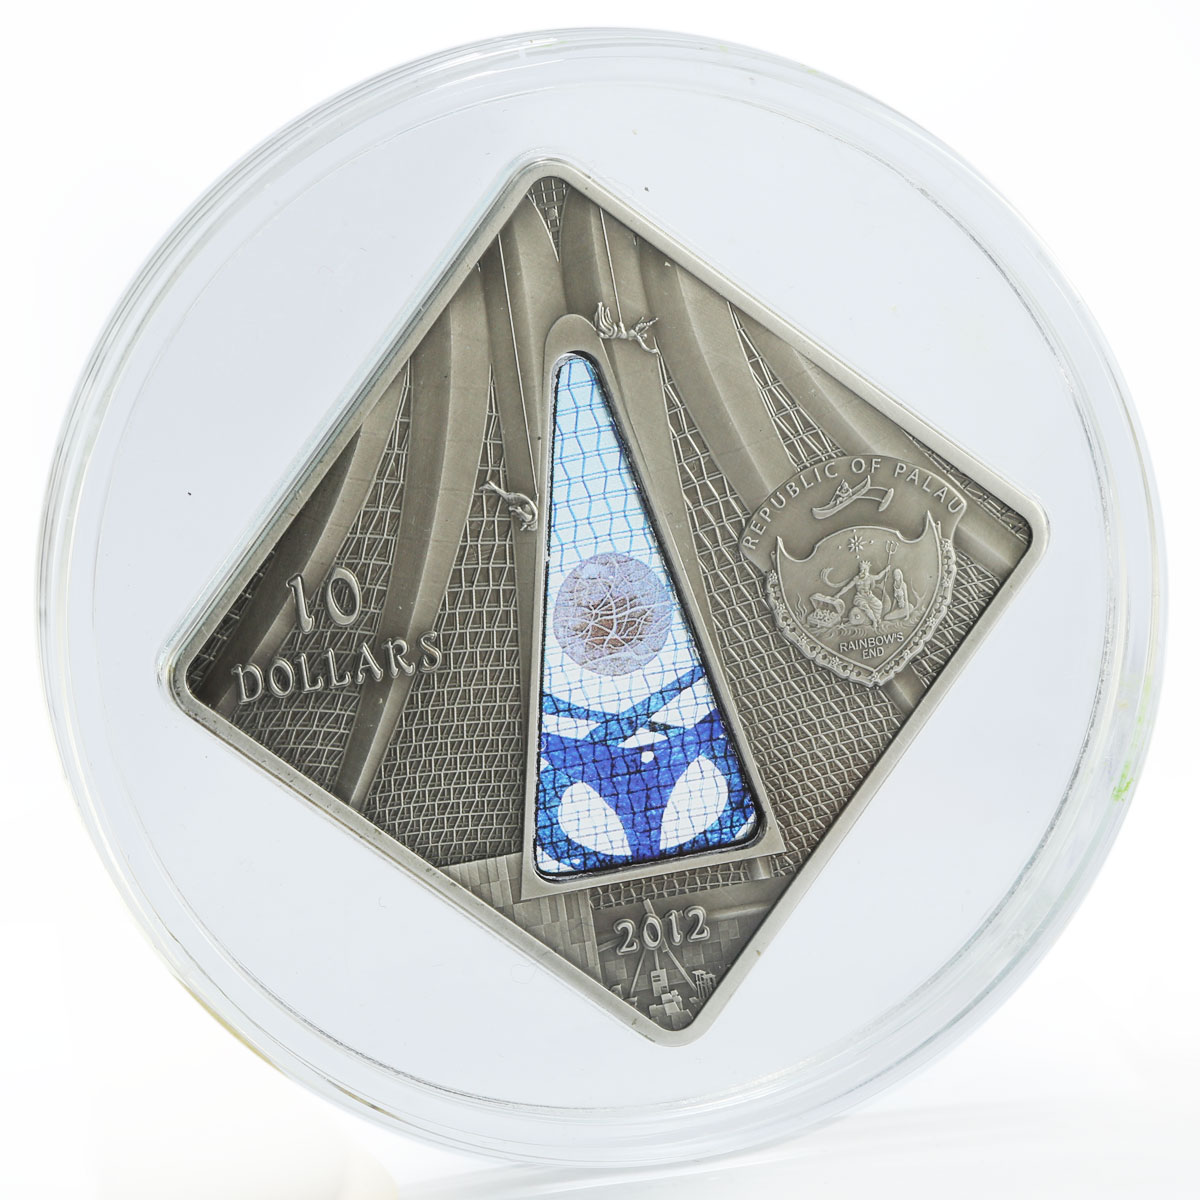 Palau 10 dollars Cathedral de Brasilia colored window antique silver coin 2012